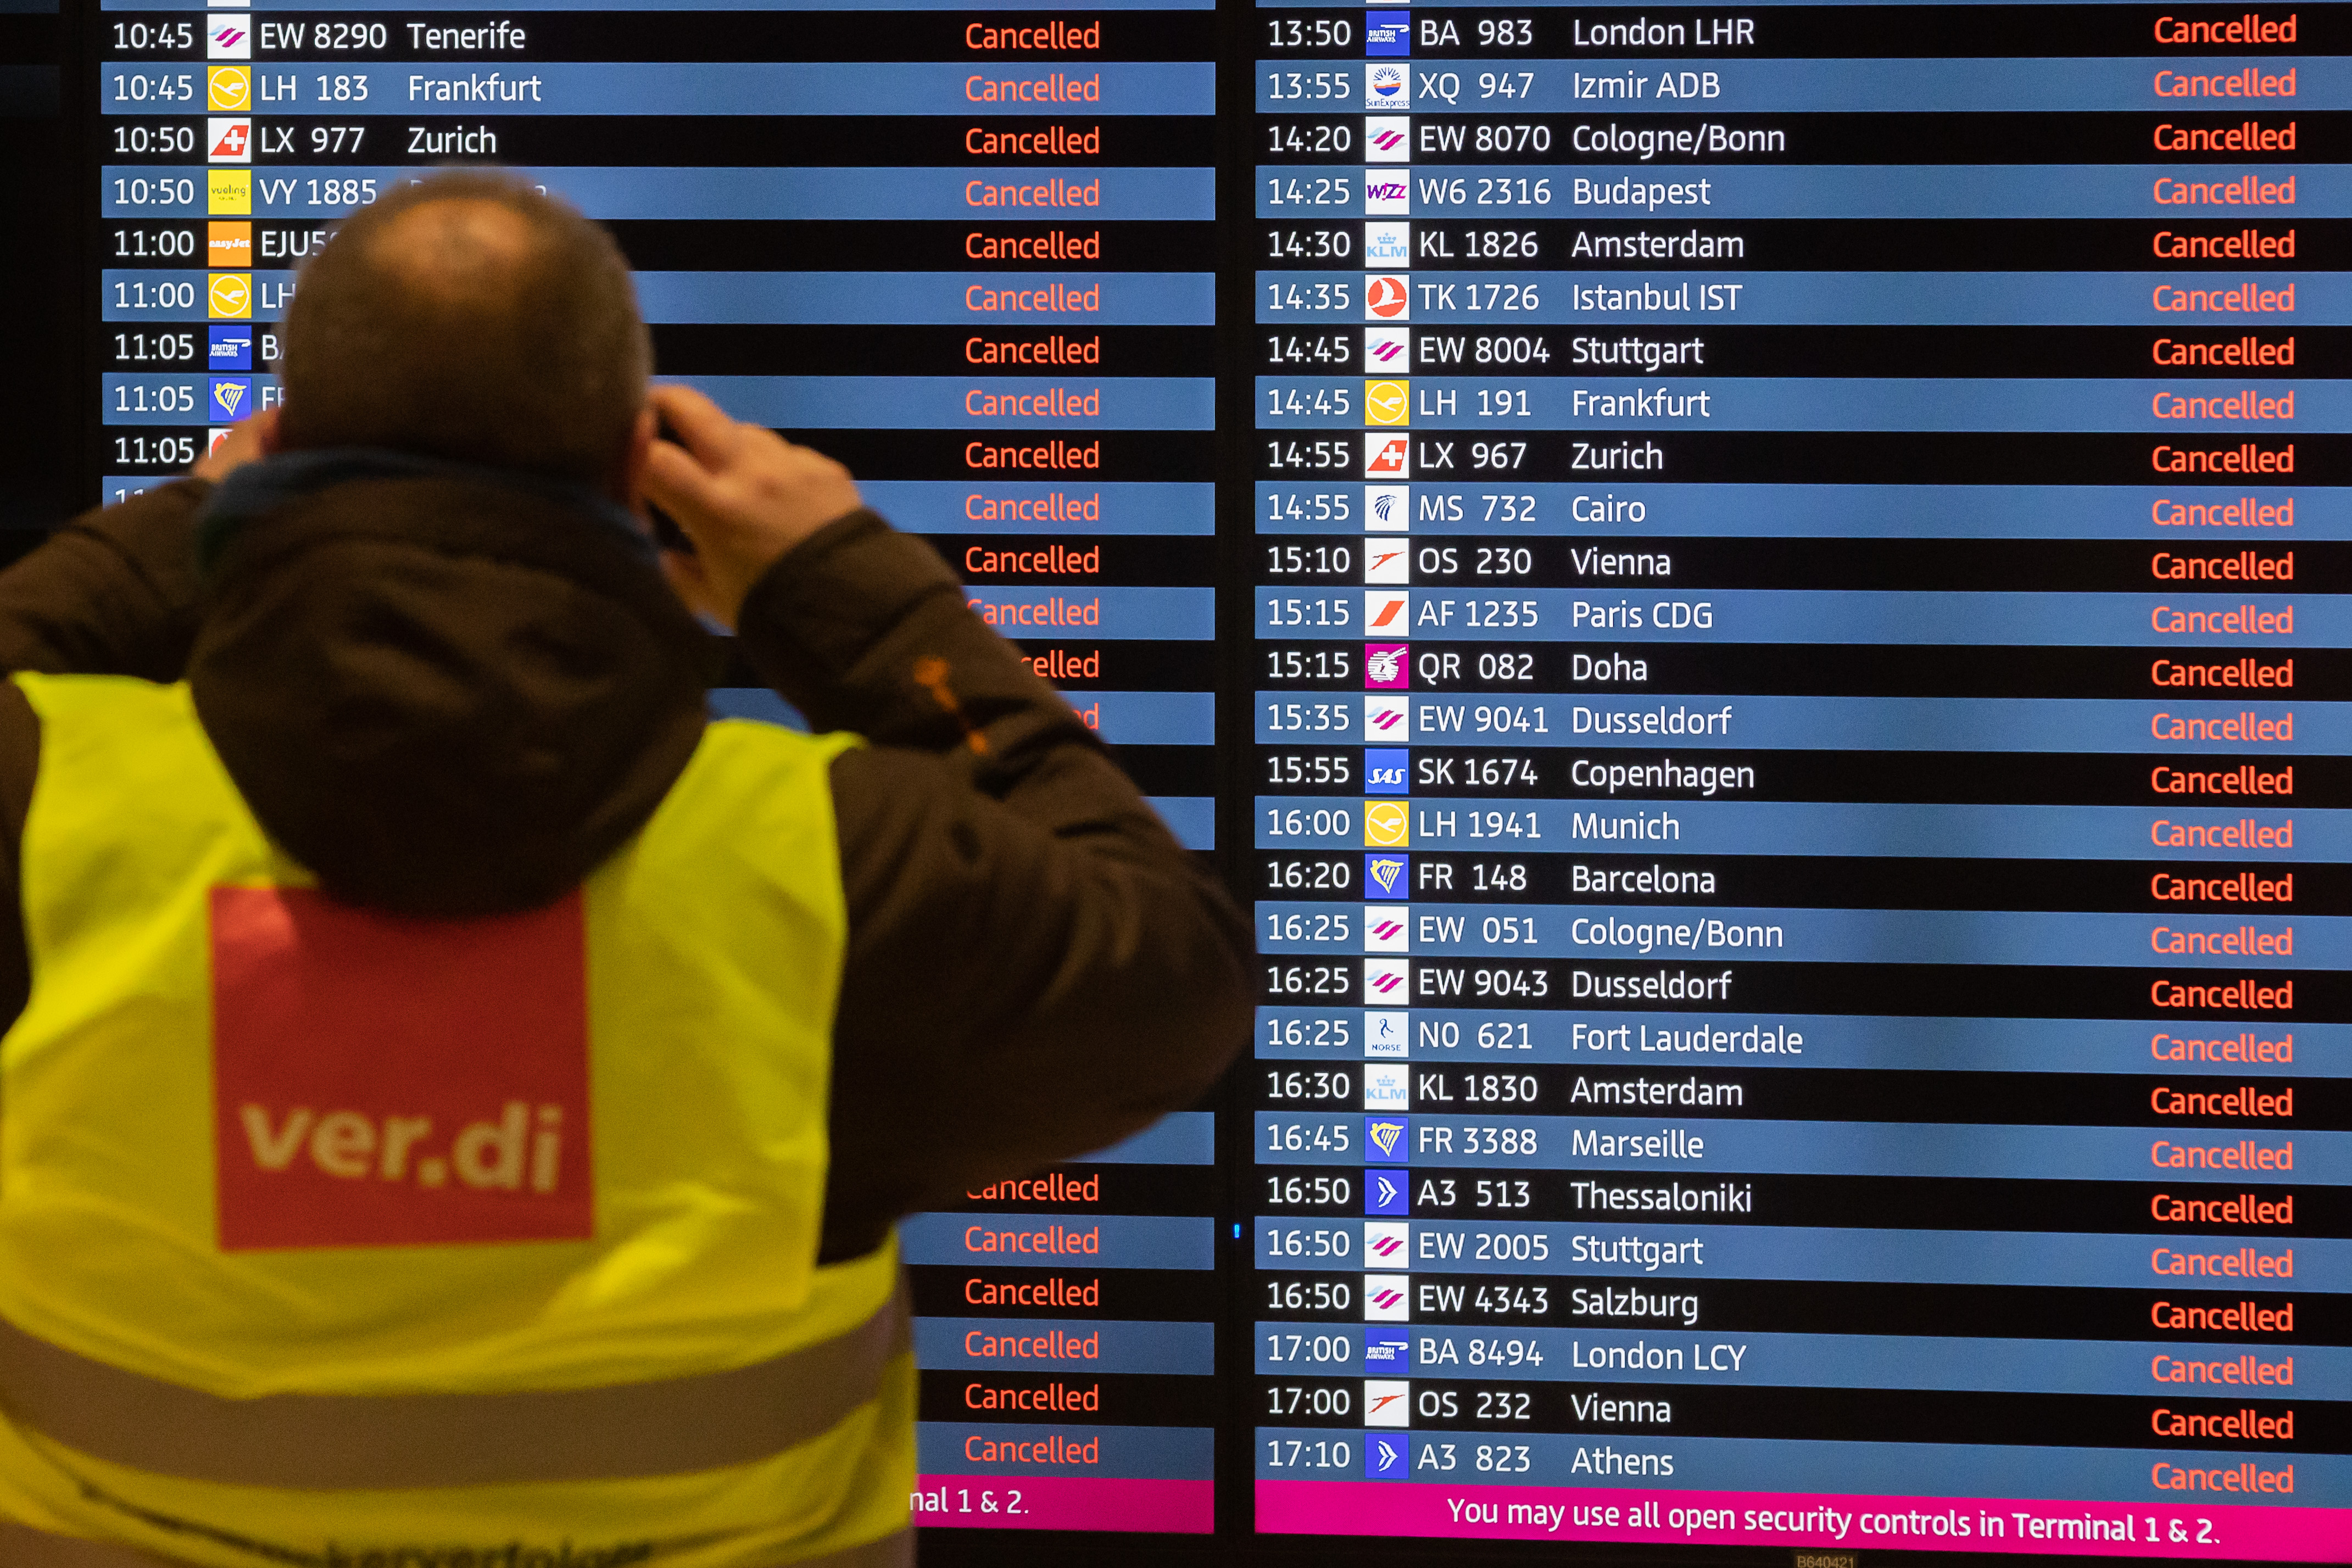 A man wearing a Verdi vest takes a photo of a display board showing all flights as canceled during a warning strike at Berlin-Brandenburg BER Airport, Jan. 25, 2023. (Christoph Soeder—picture alliance/Getty Images)